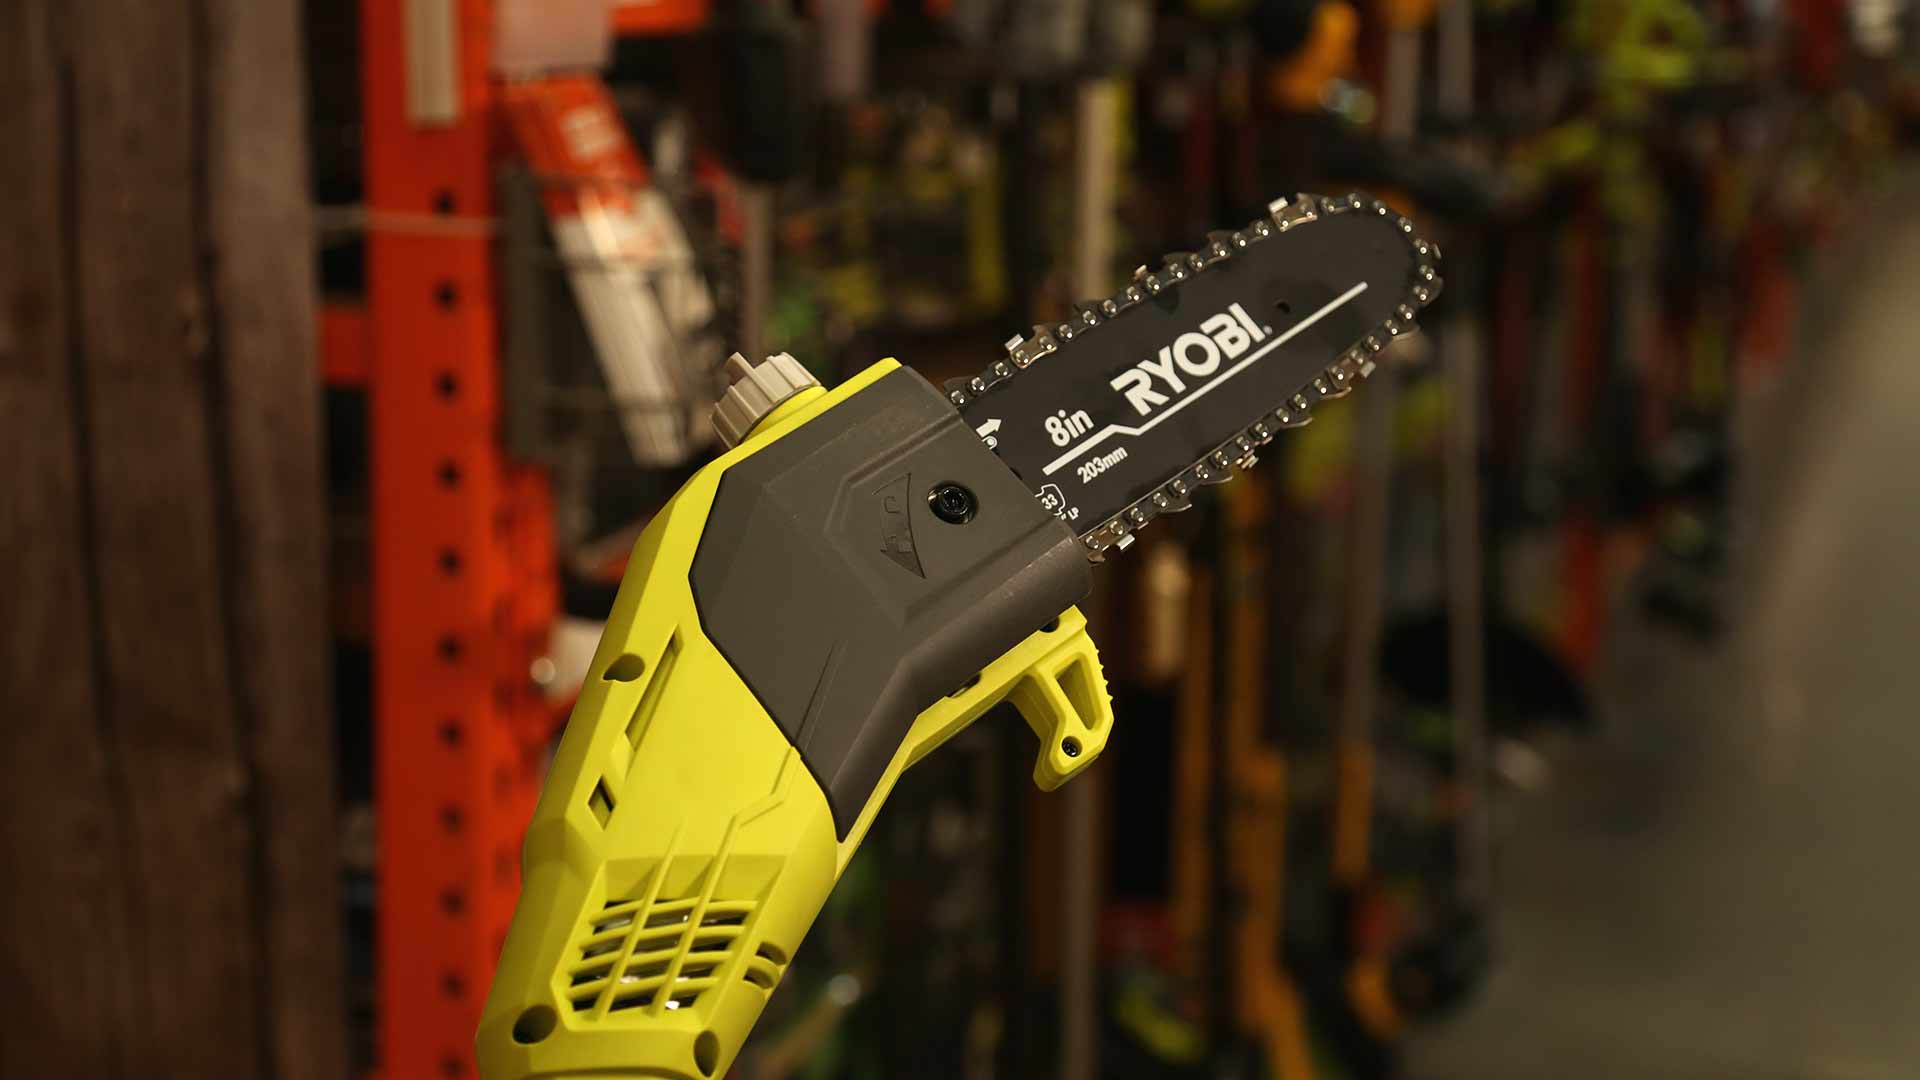 Ryobi pole saw, as as seen at The Home Depot in Mobile, Alabama